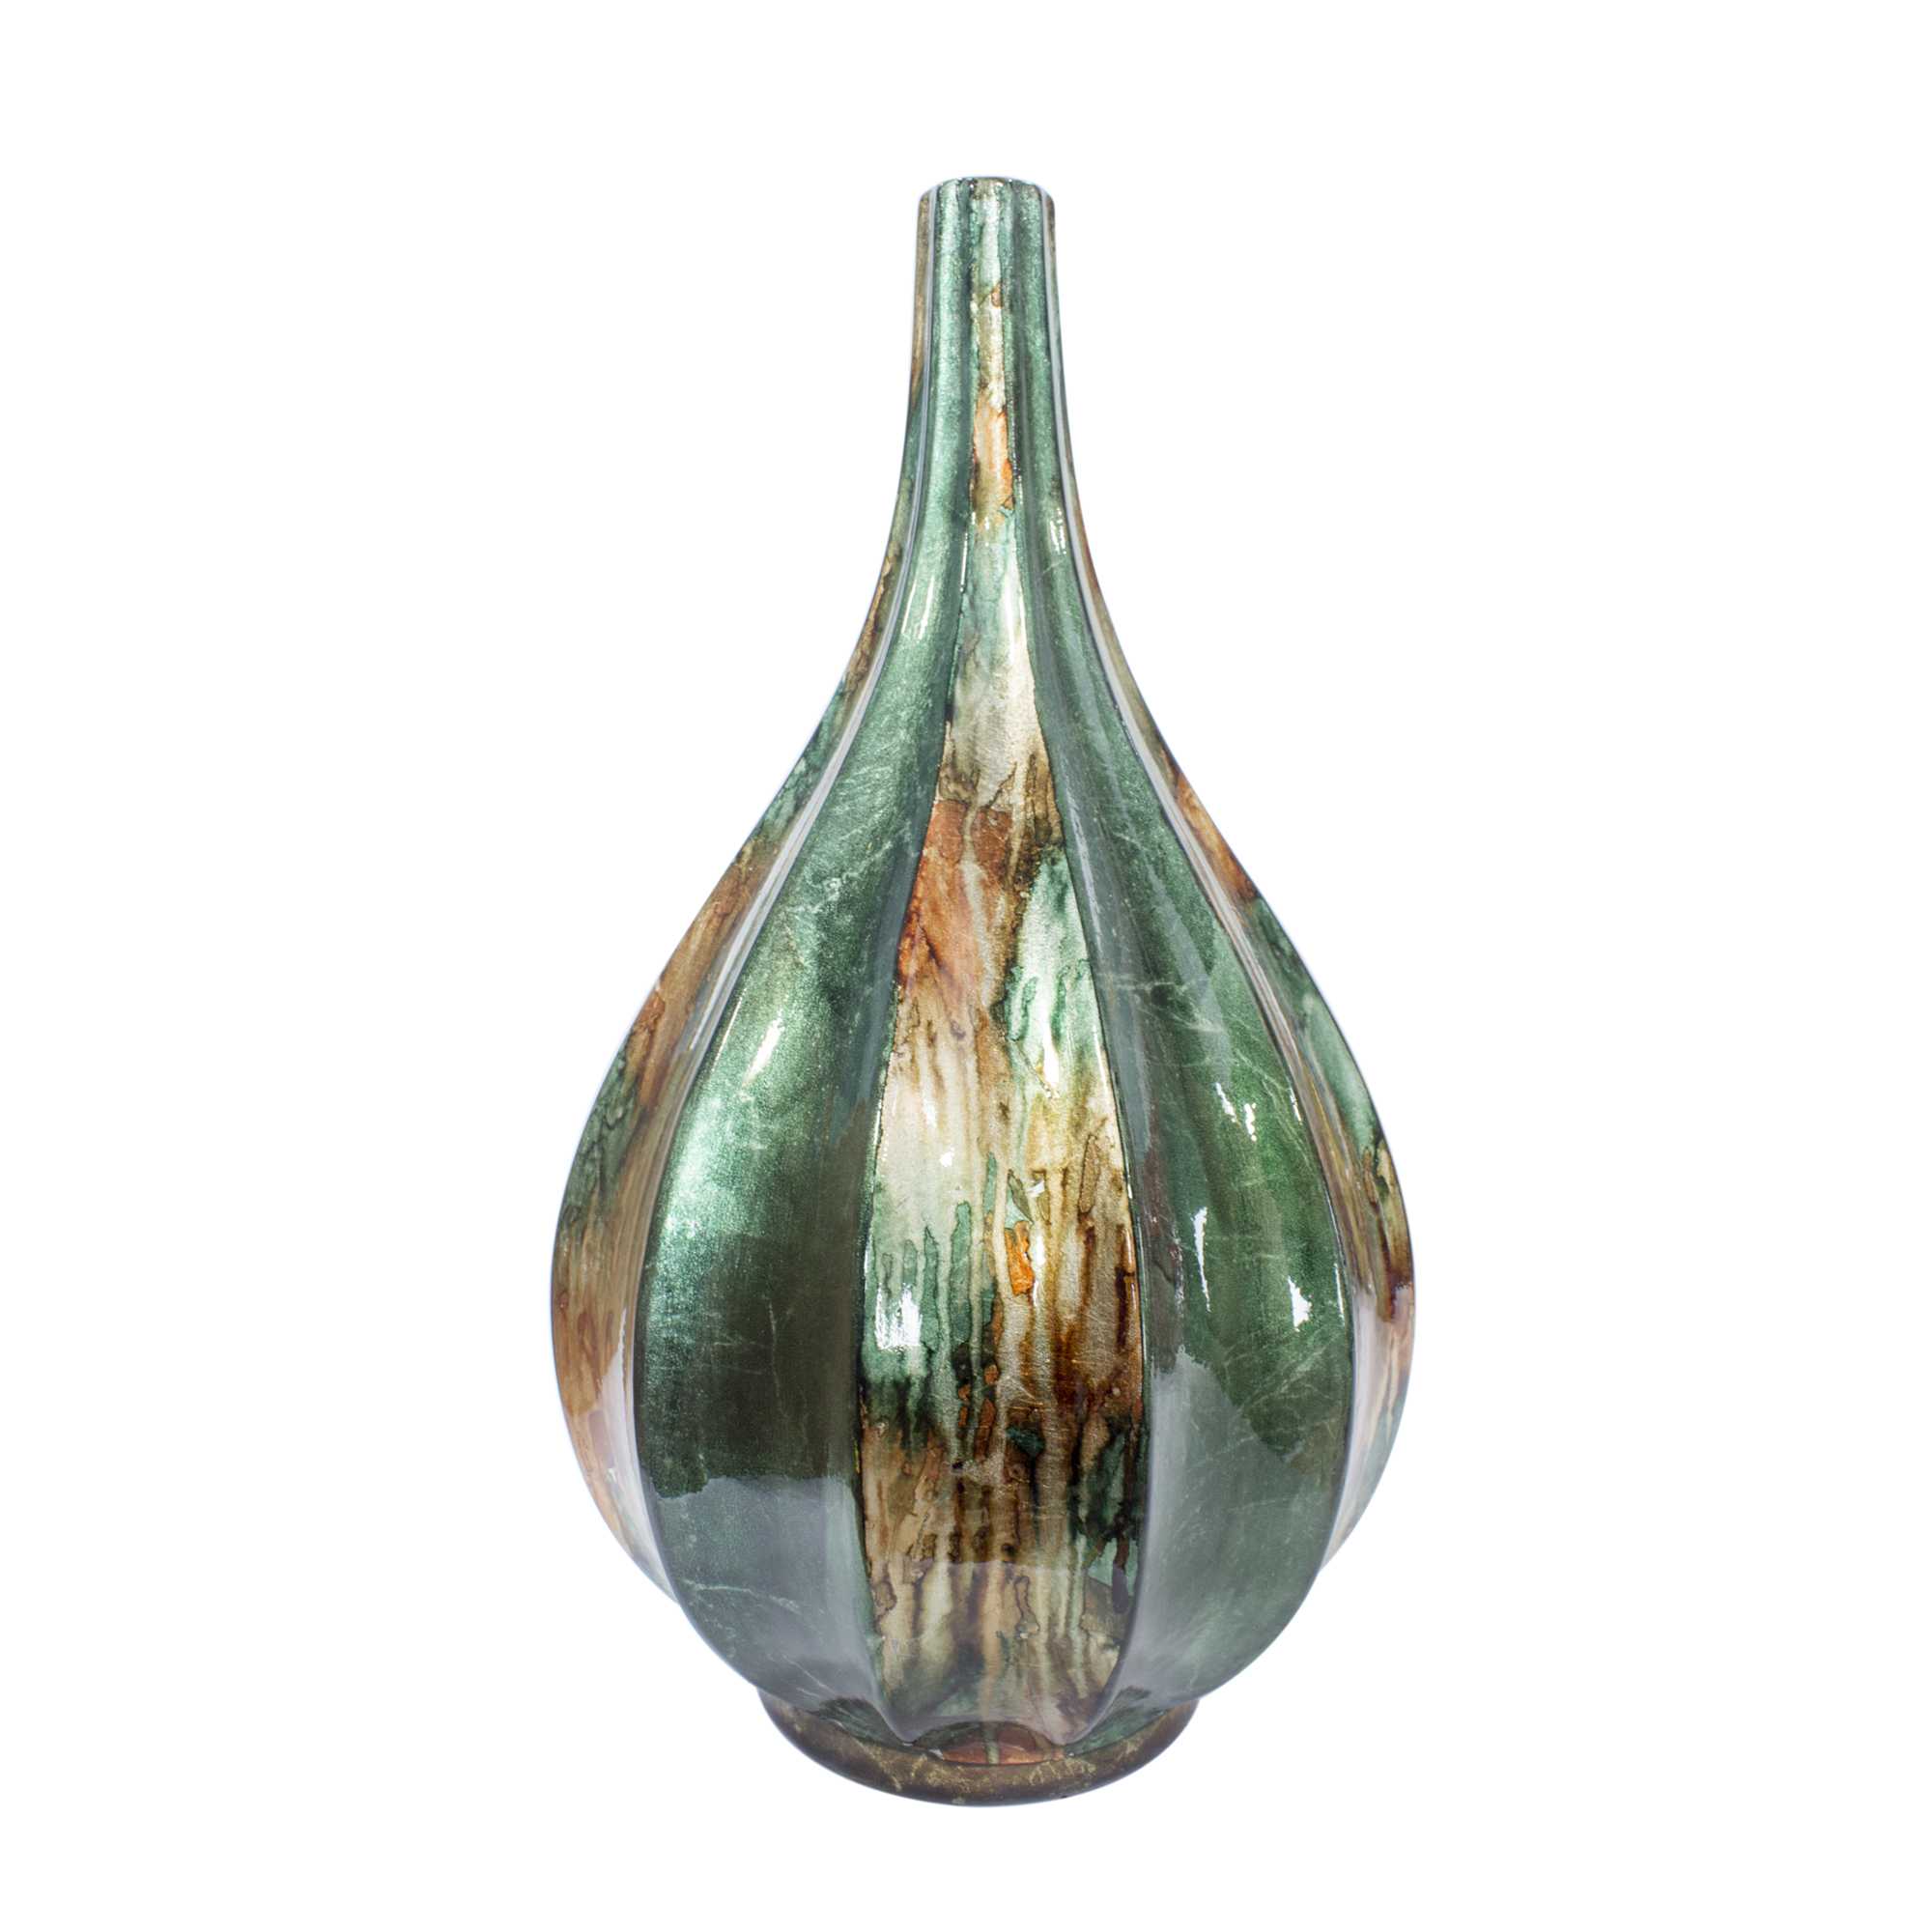 Kya Turquoise Copper Brown Foil and Lacquer Teardrop Vase